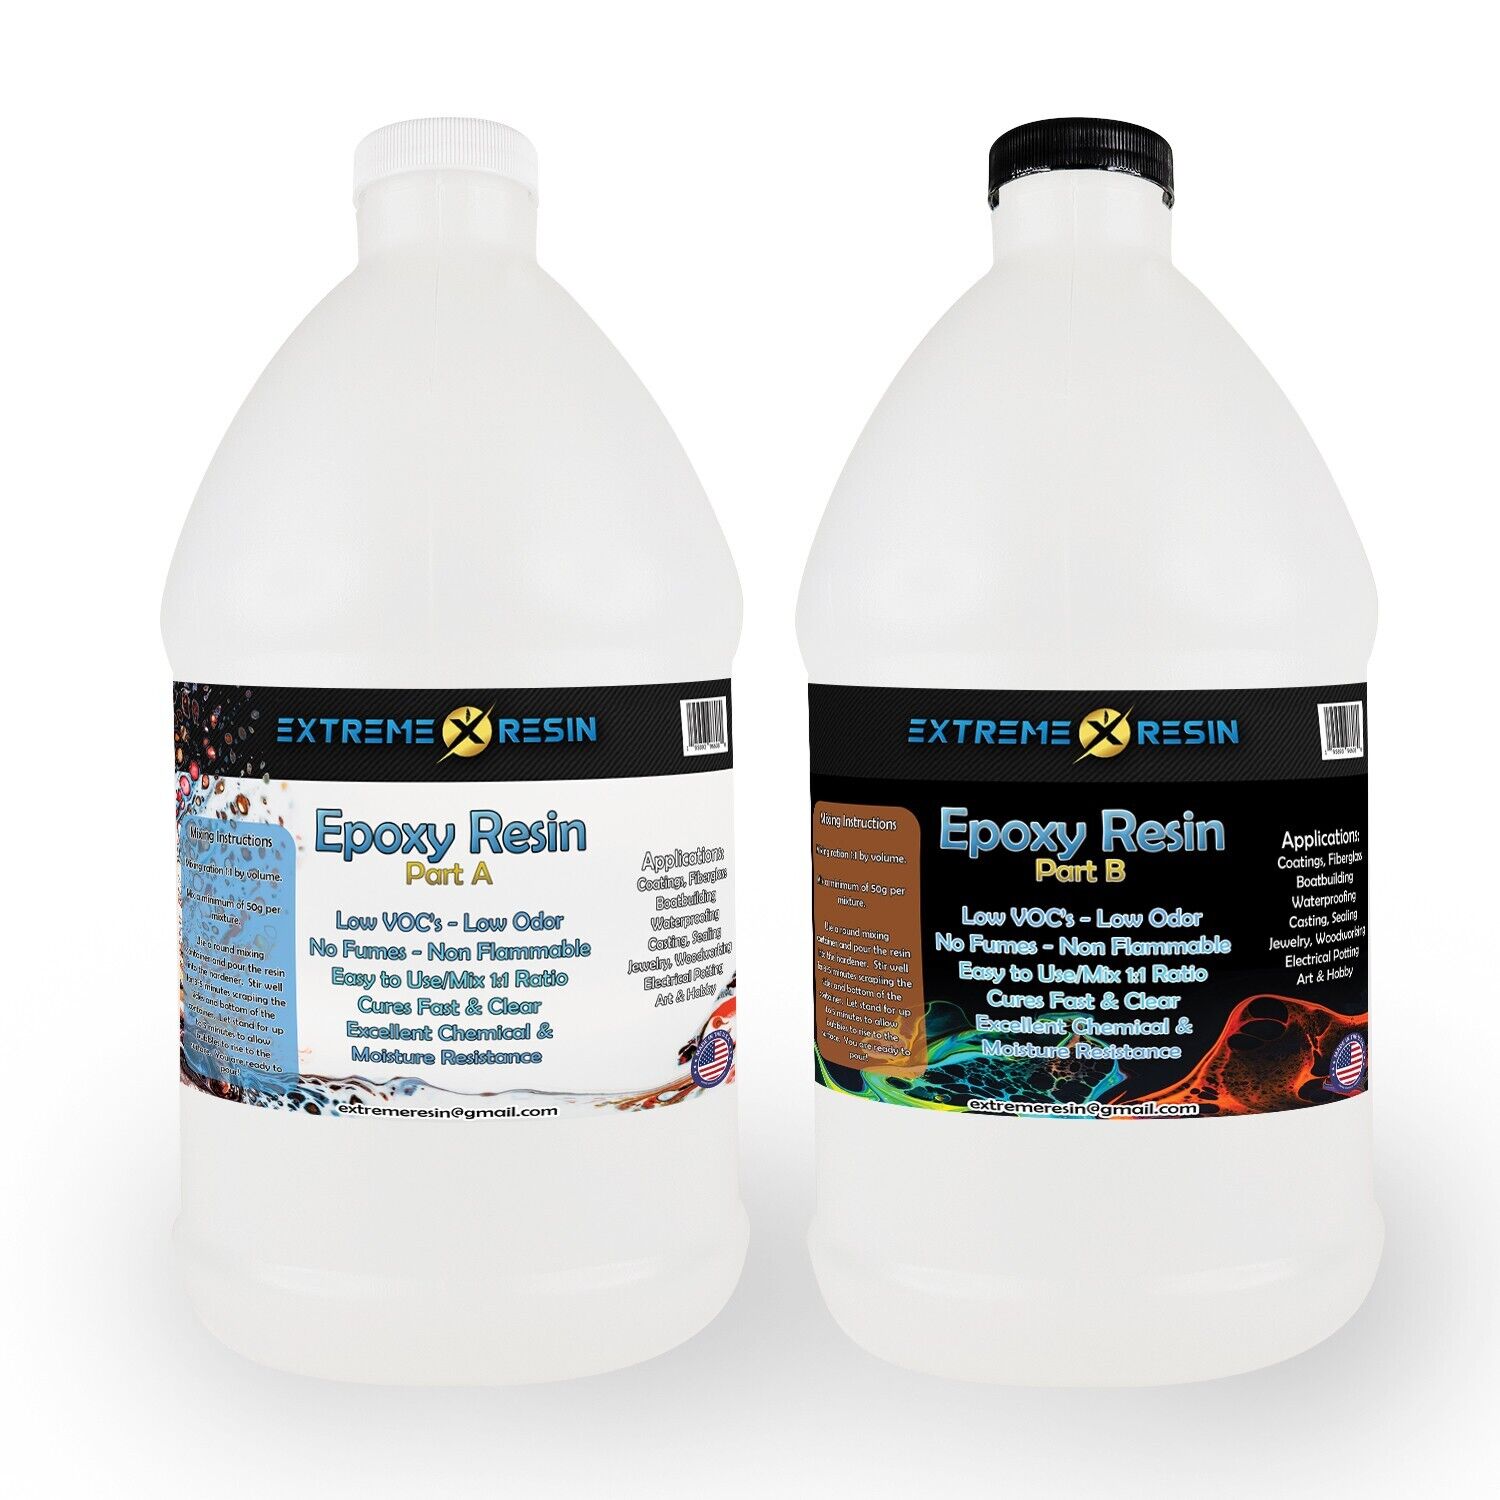 Epoxy resin 1 gallon kit, excellent clarity, clear, easy mixing, free delivery